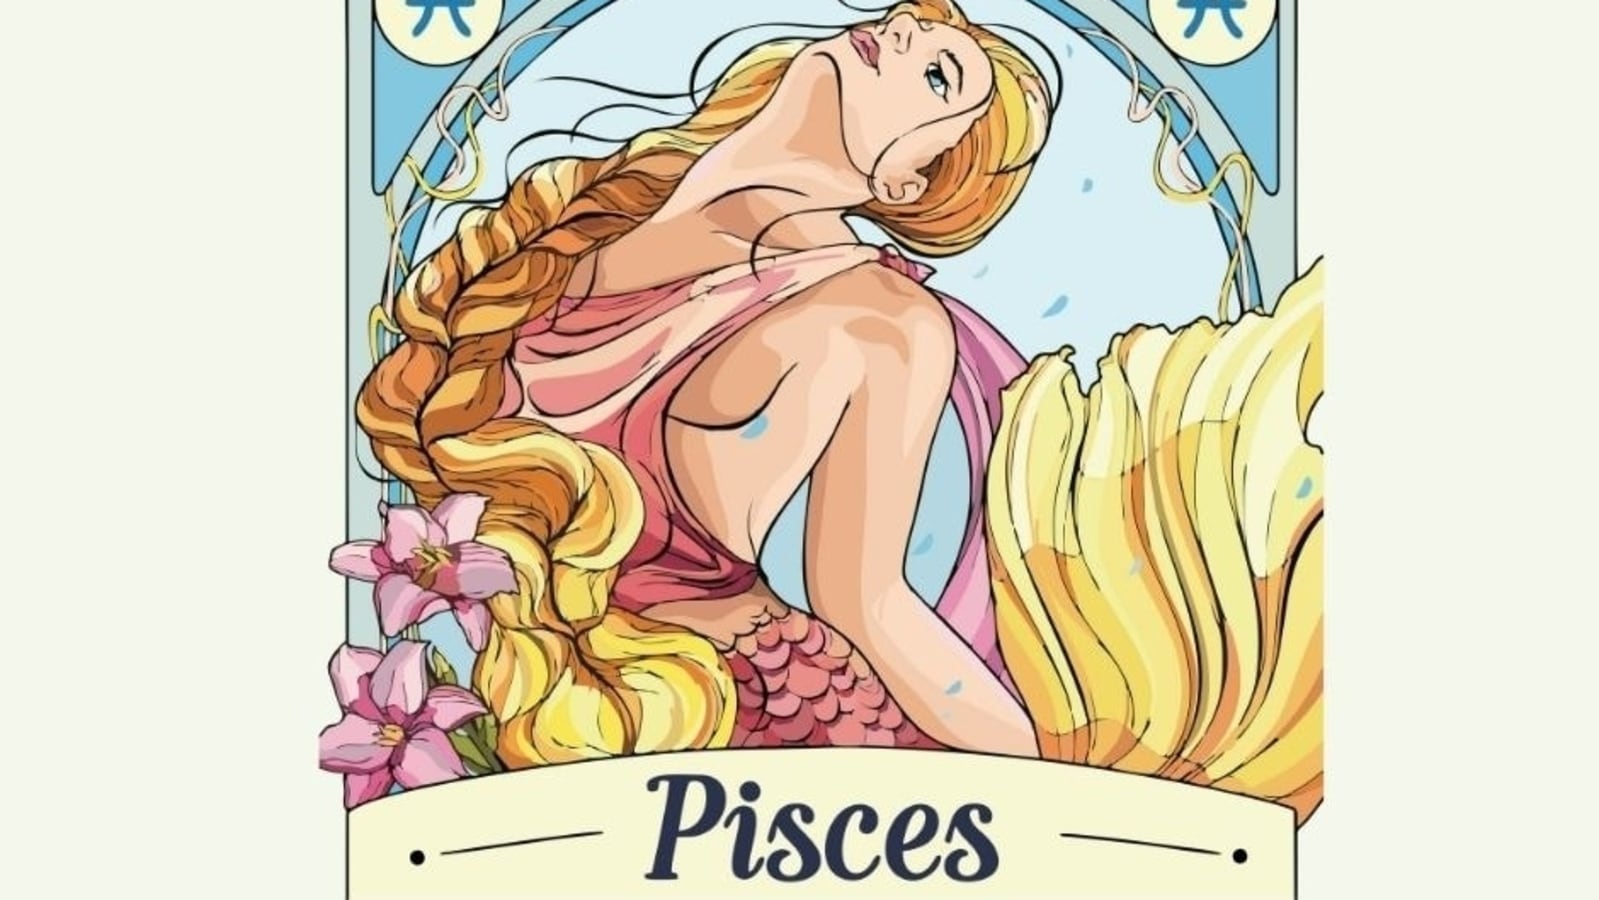 Pisces Horoscope Today: Daily Predictions for June 29, '22 states, promising day